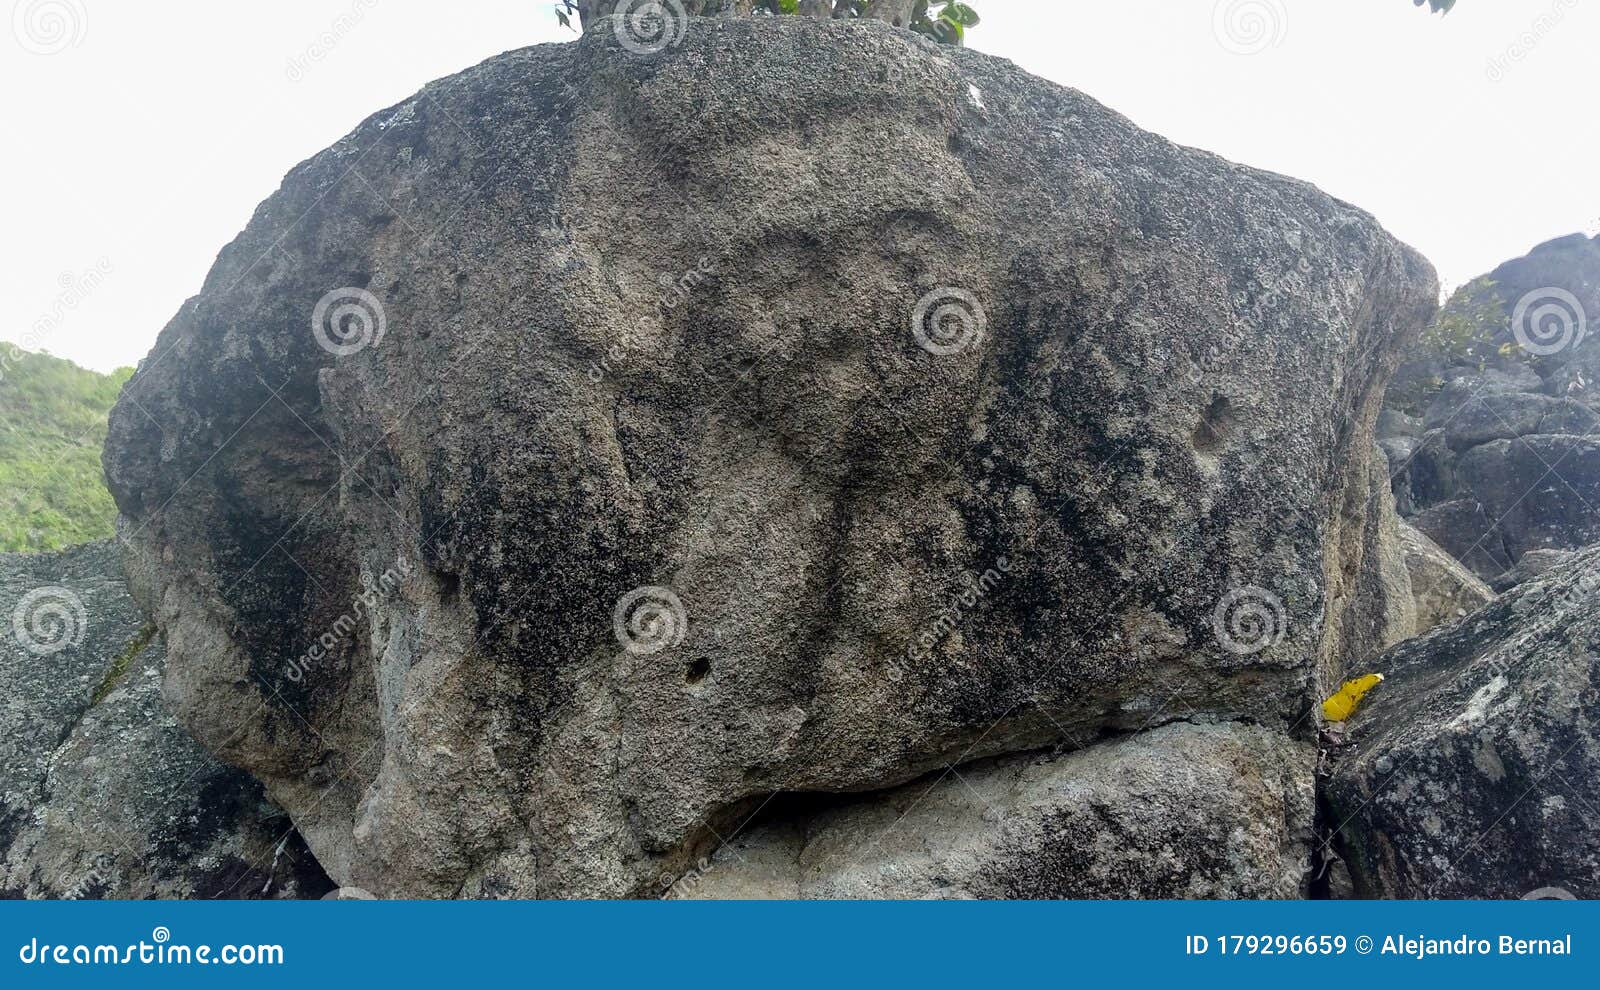 closeup to an ancient petroglyph of human face at colombian san agustin archaeological park.